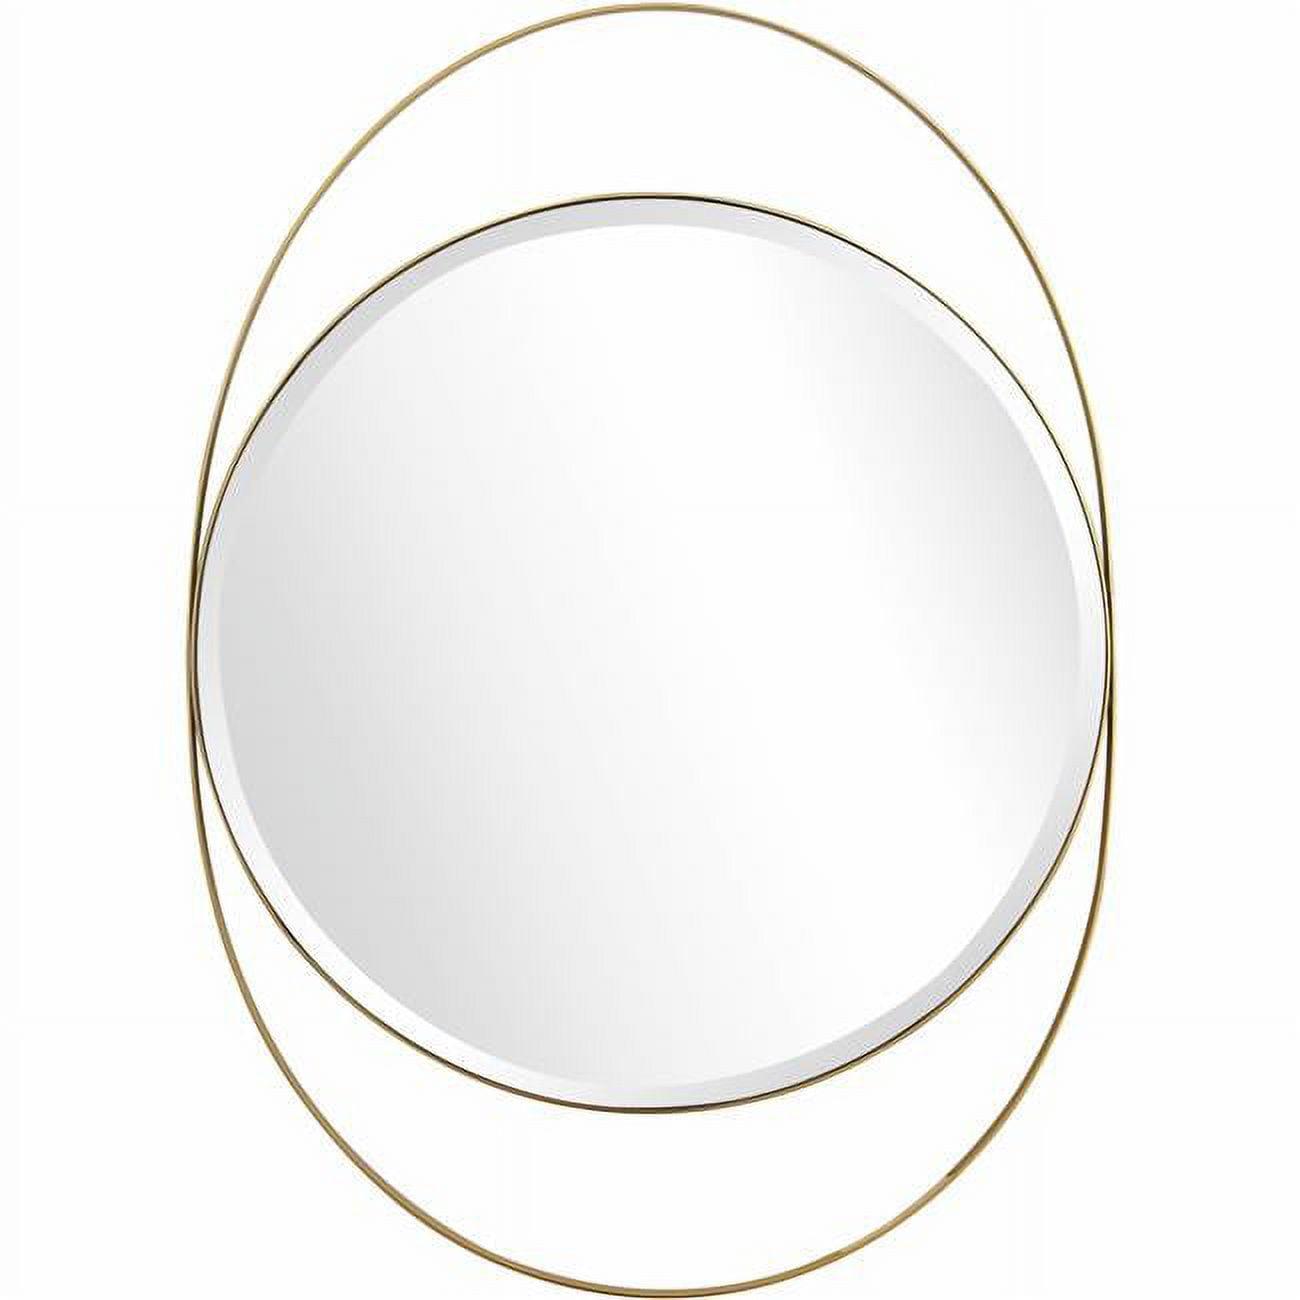 Elegant Oval Wood and Gold Accent Wall Mirror